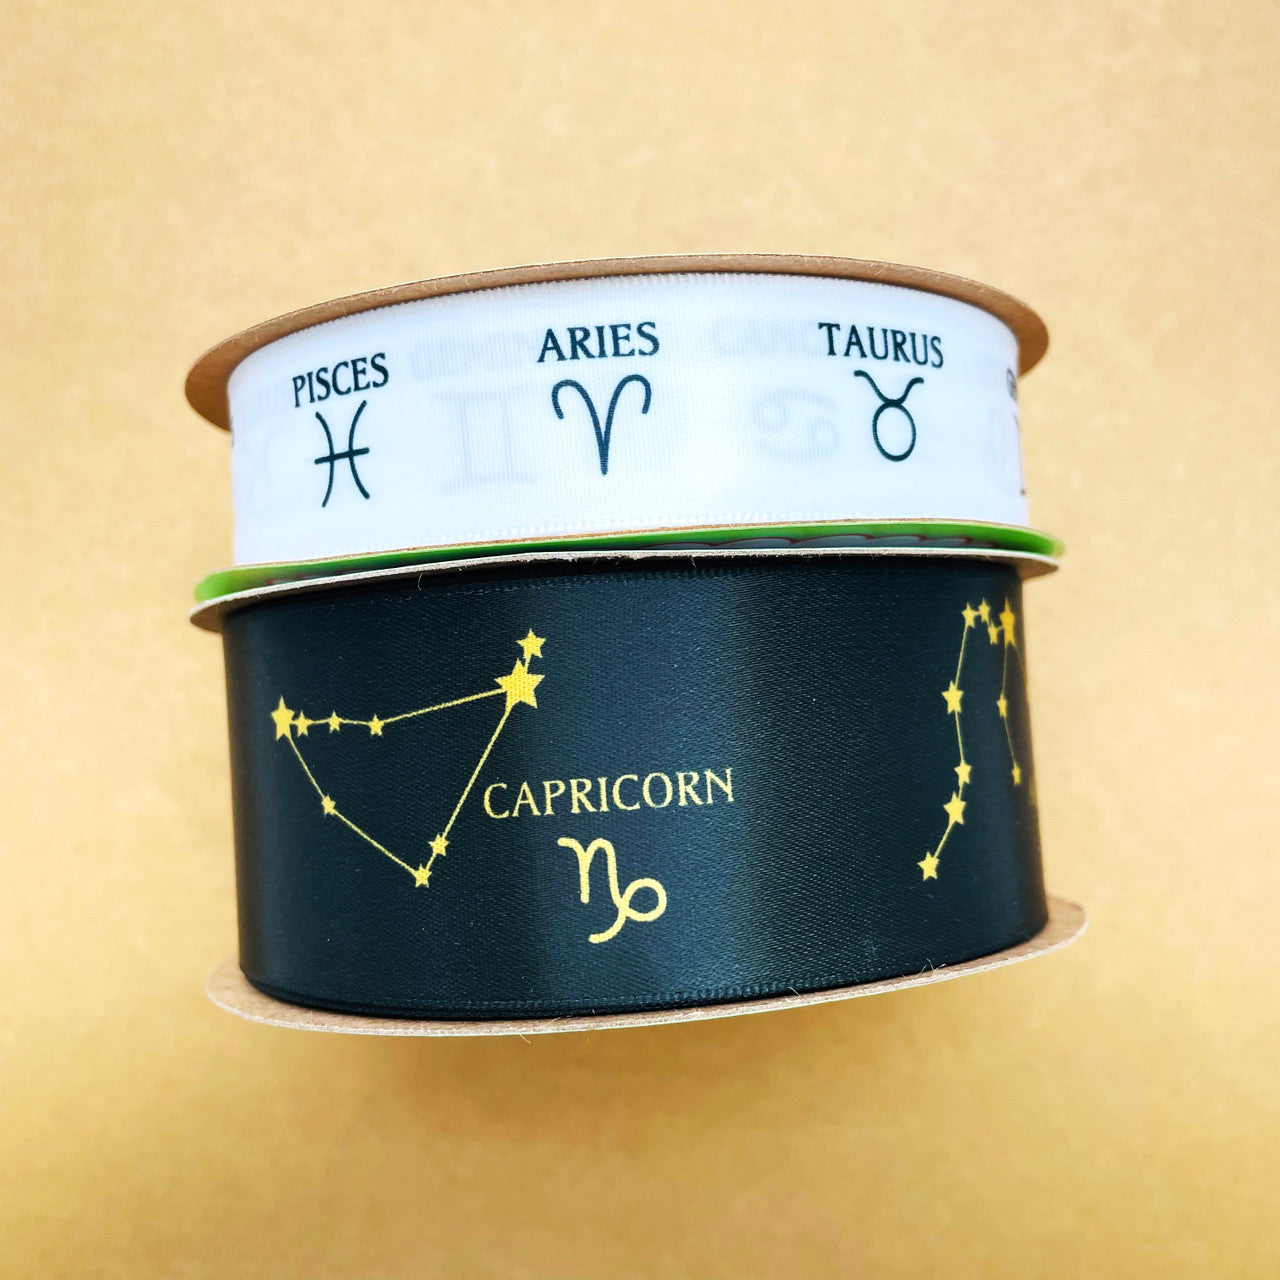 Mix and math our zodiac symbols with our constellation ribbon for fun party decor!